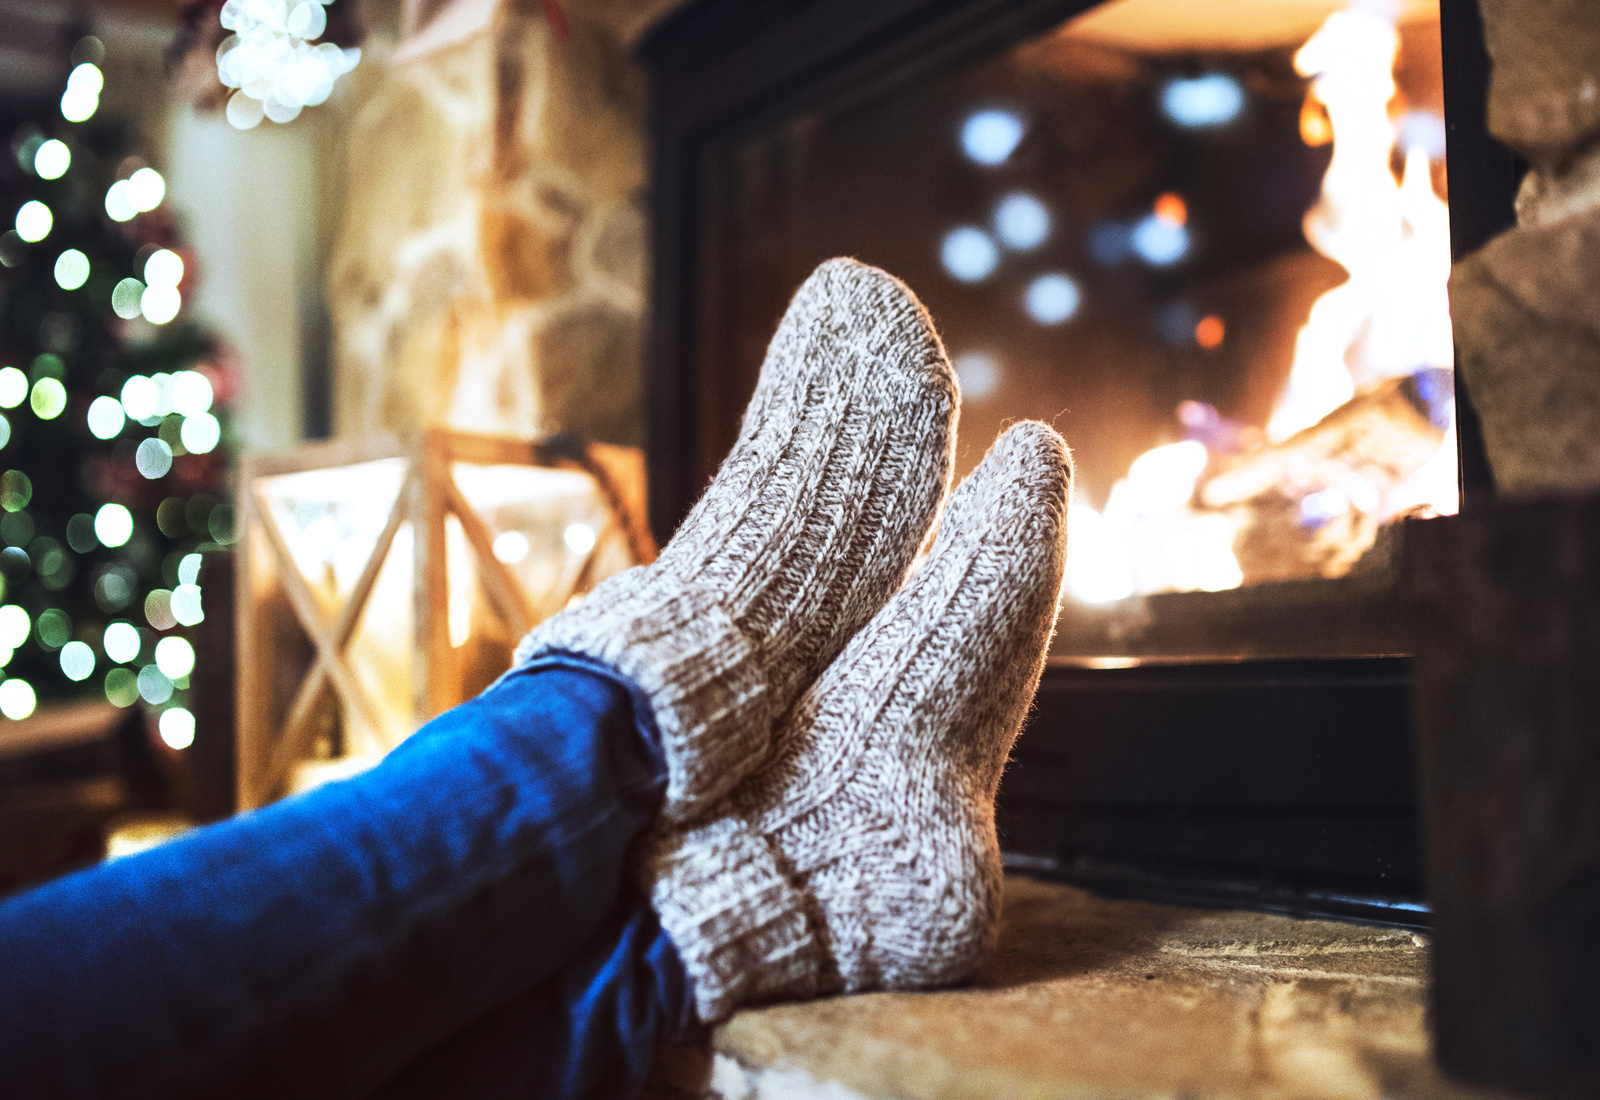 Half of the Population Can’t Pass This 🌍 Science Quiz With Flying Colors — Can You Do It? Cosy warm socks fireplace